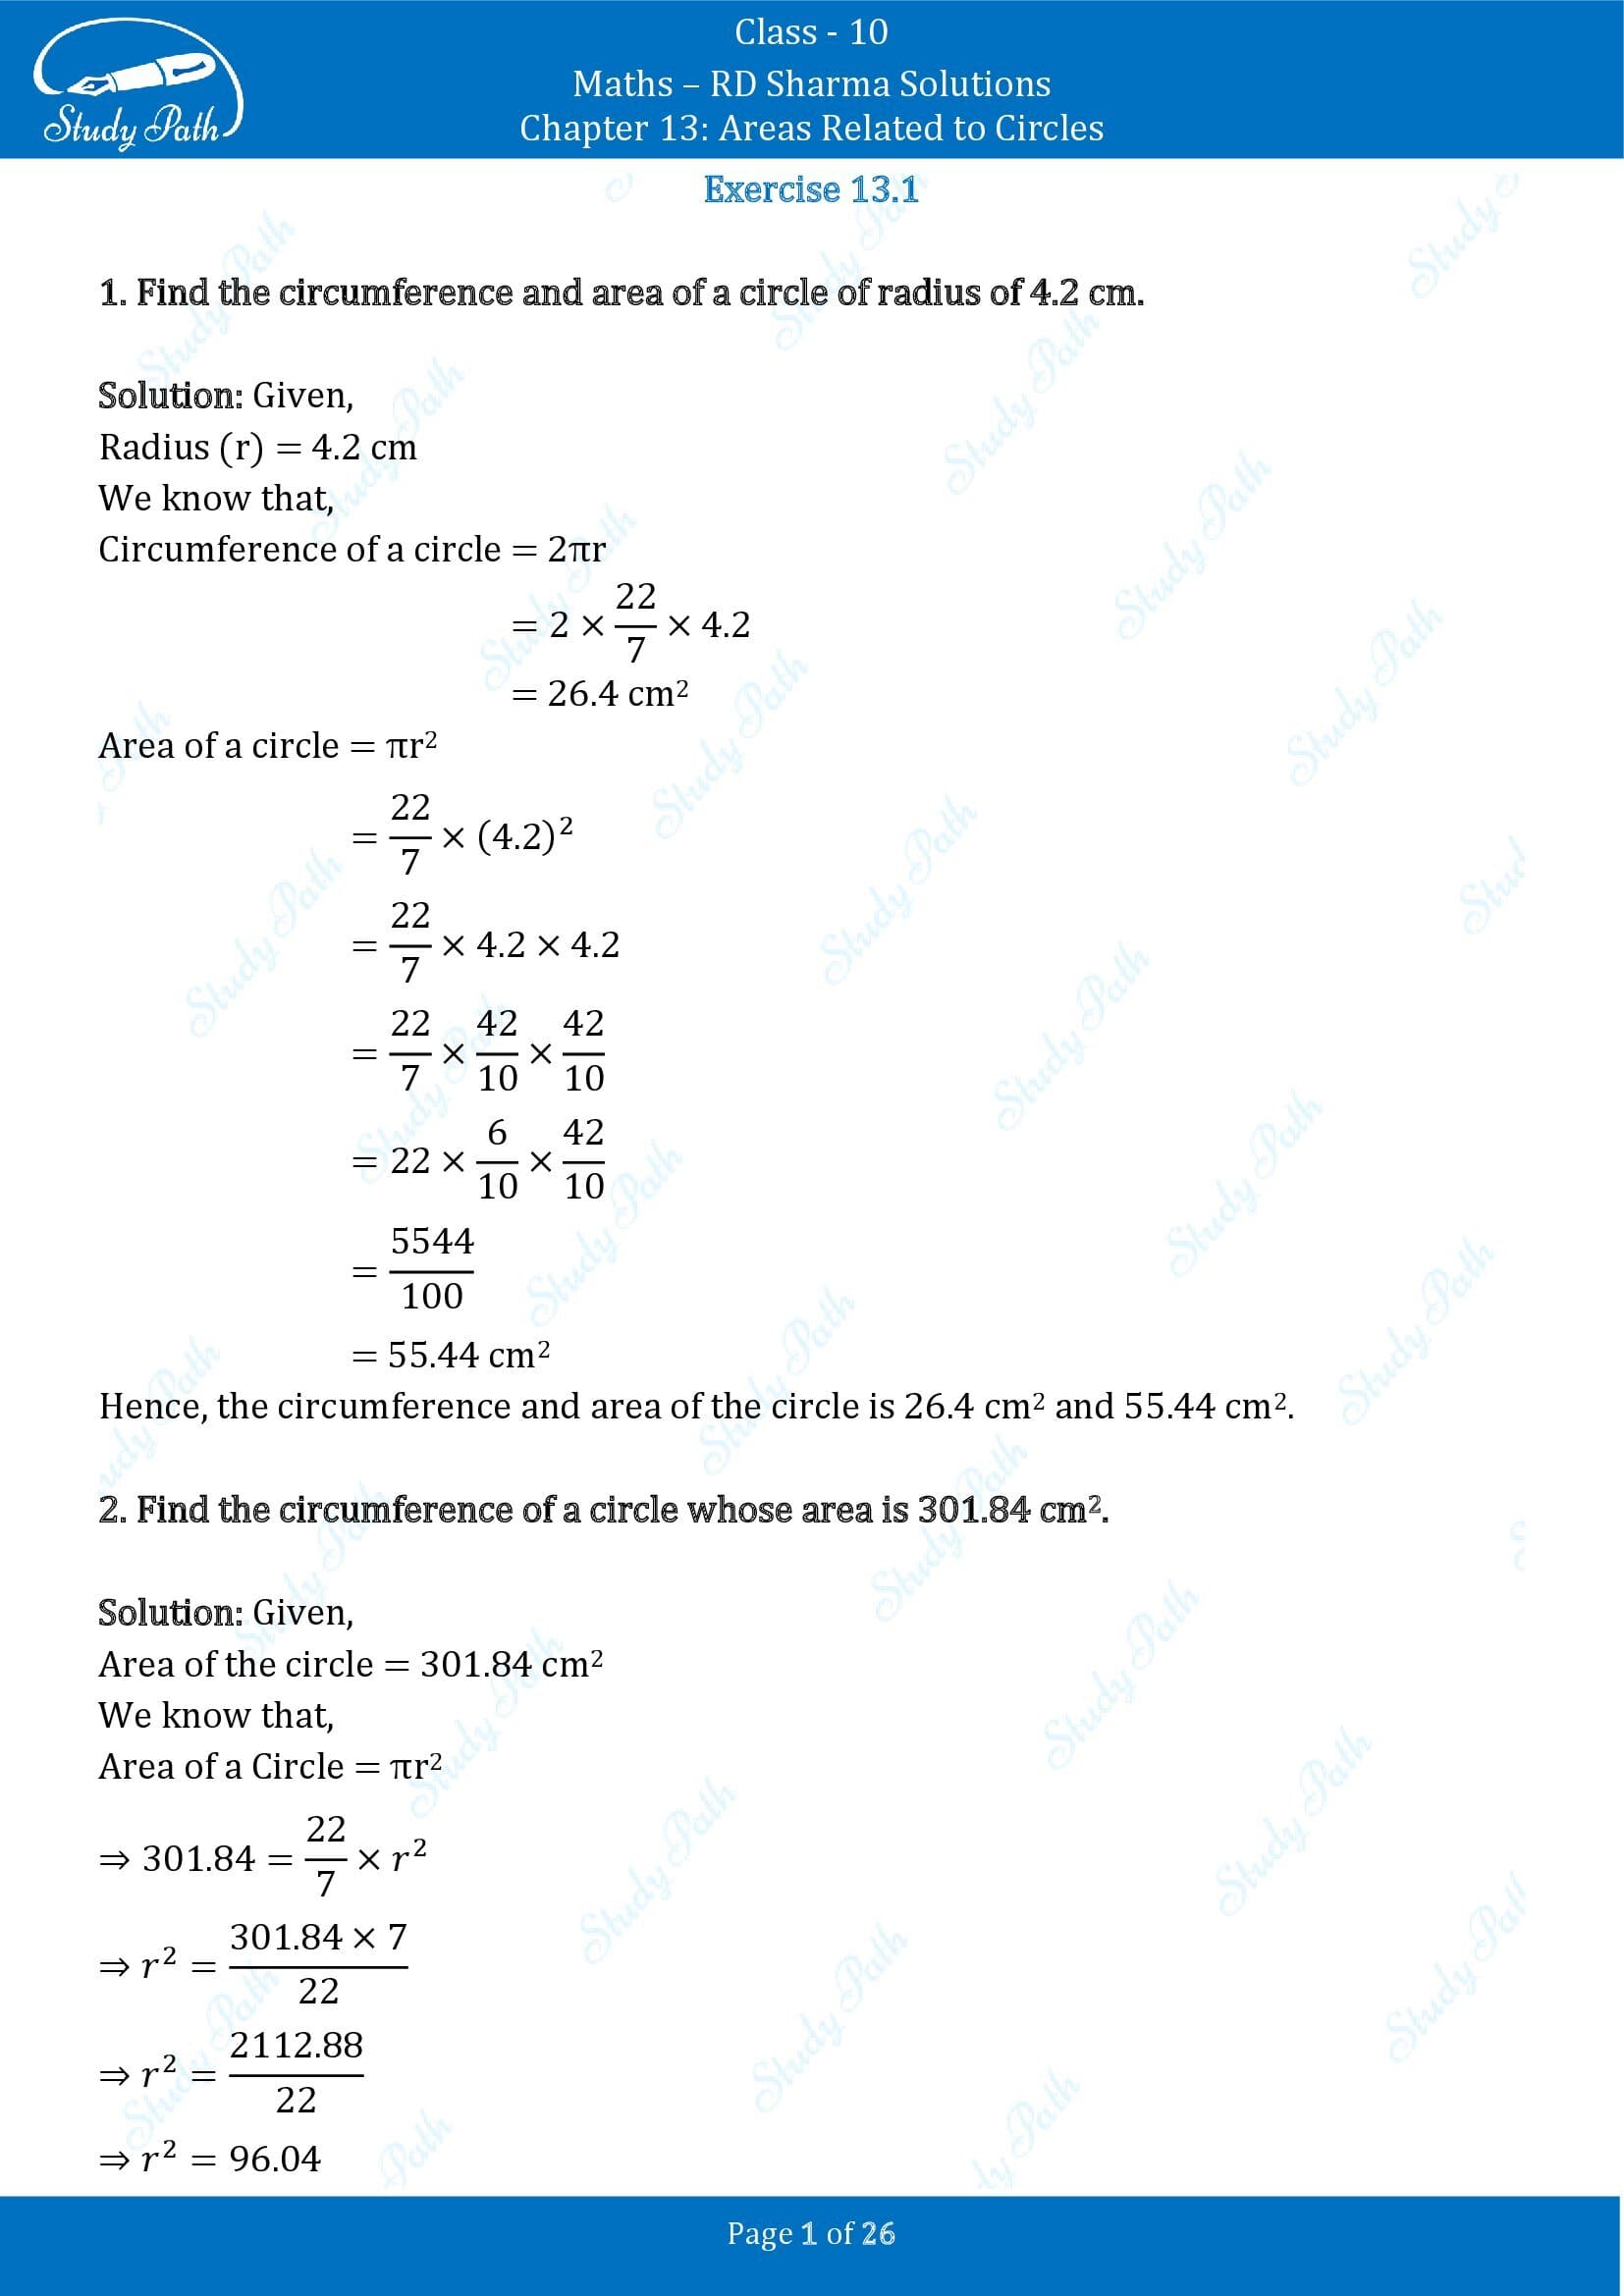 RD Sharma Solutions Class 10 Chapter 13 Areas Related to Circles Exercise 13.1 00001